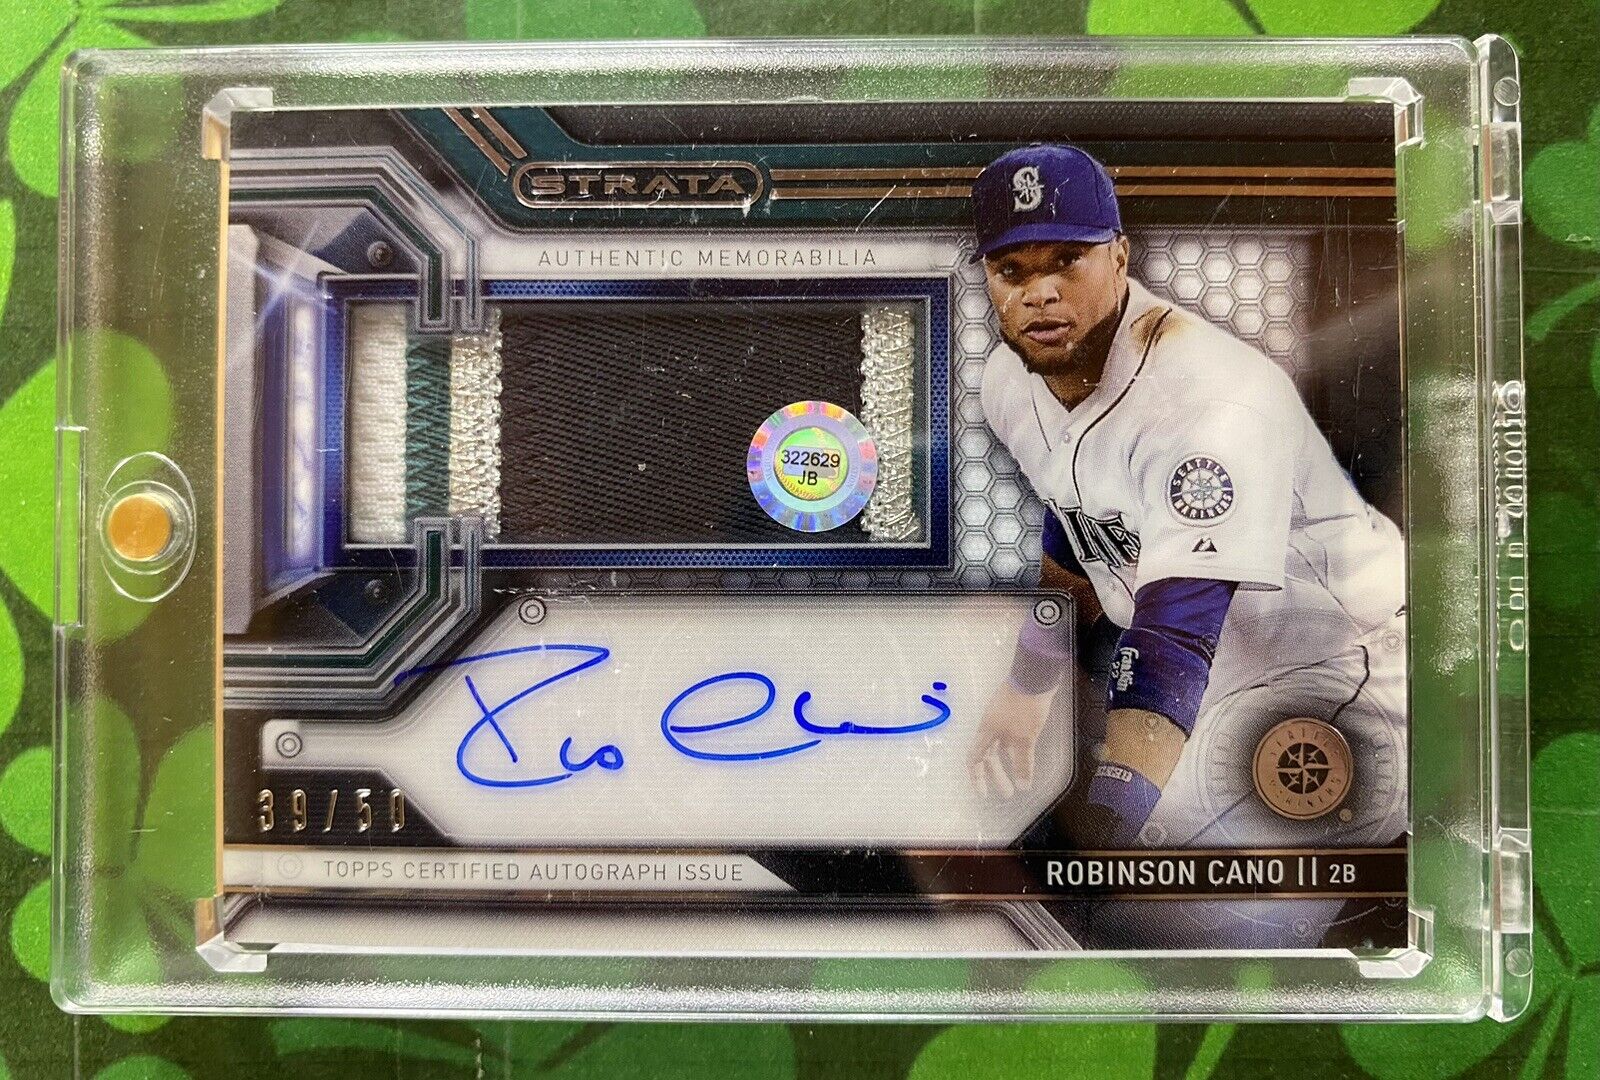 2016 Topps Strata Robinson Cano Clearly Authentic Autograph Relic #/50 #CAAR-RCN